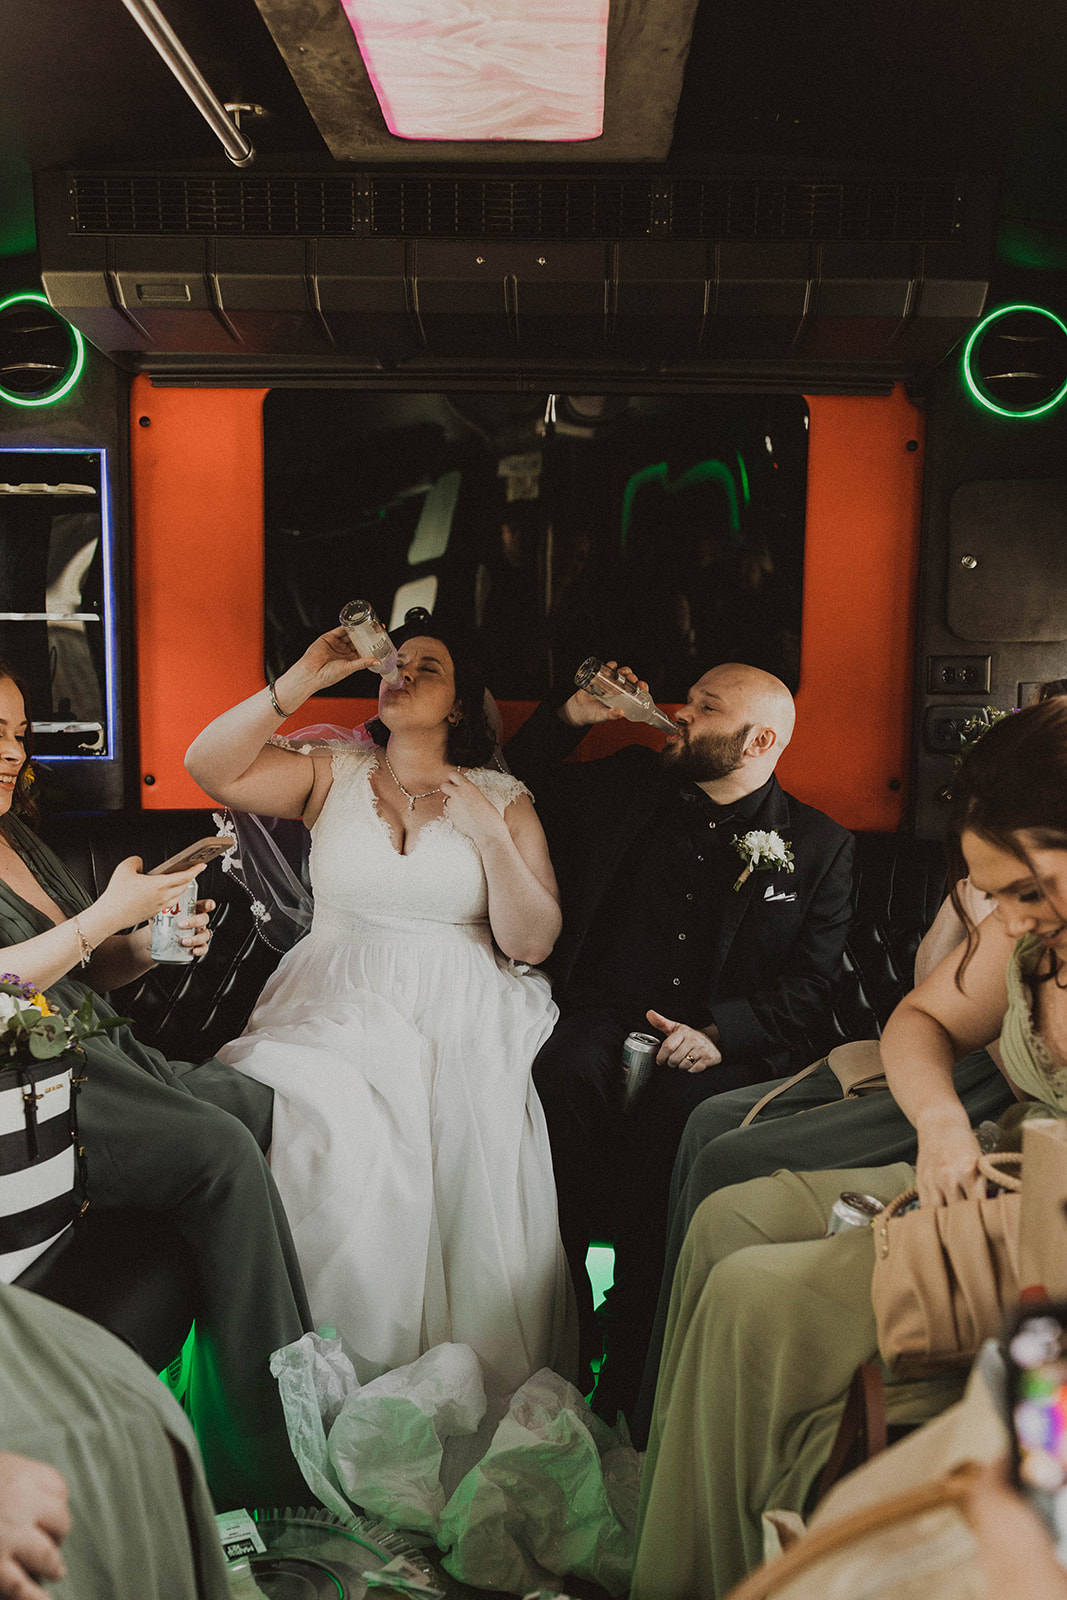 The wedding party rides the party bus together!